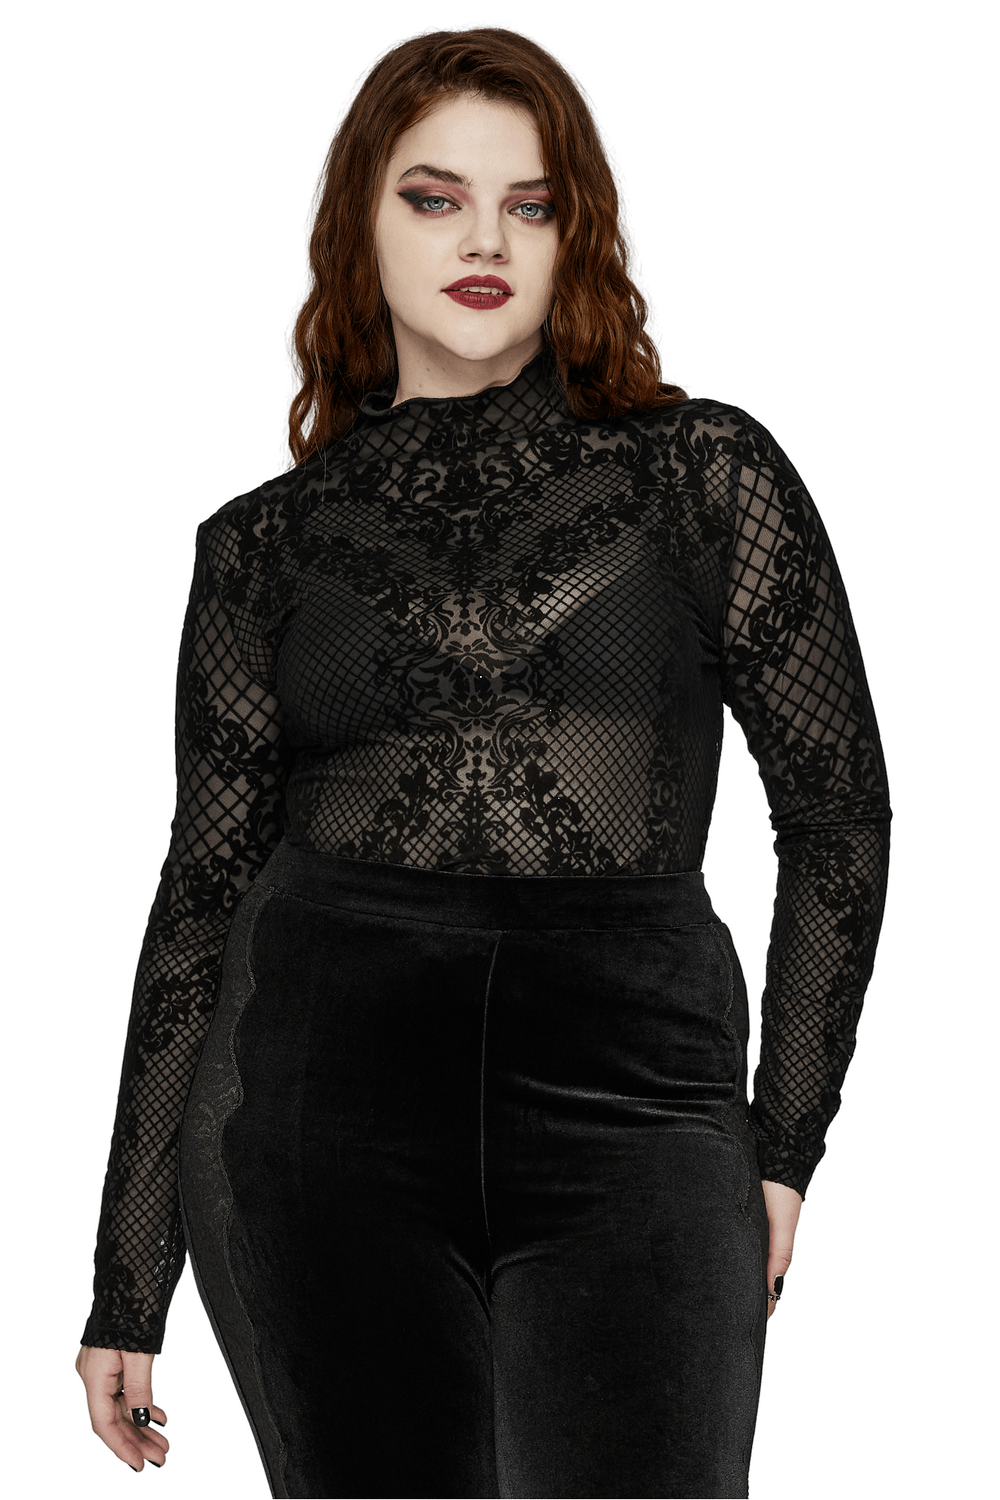 Gothic Flocked Mesh Long Sleeves High-Collar Top